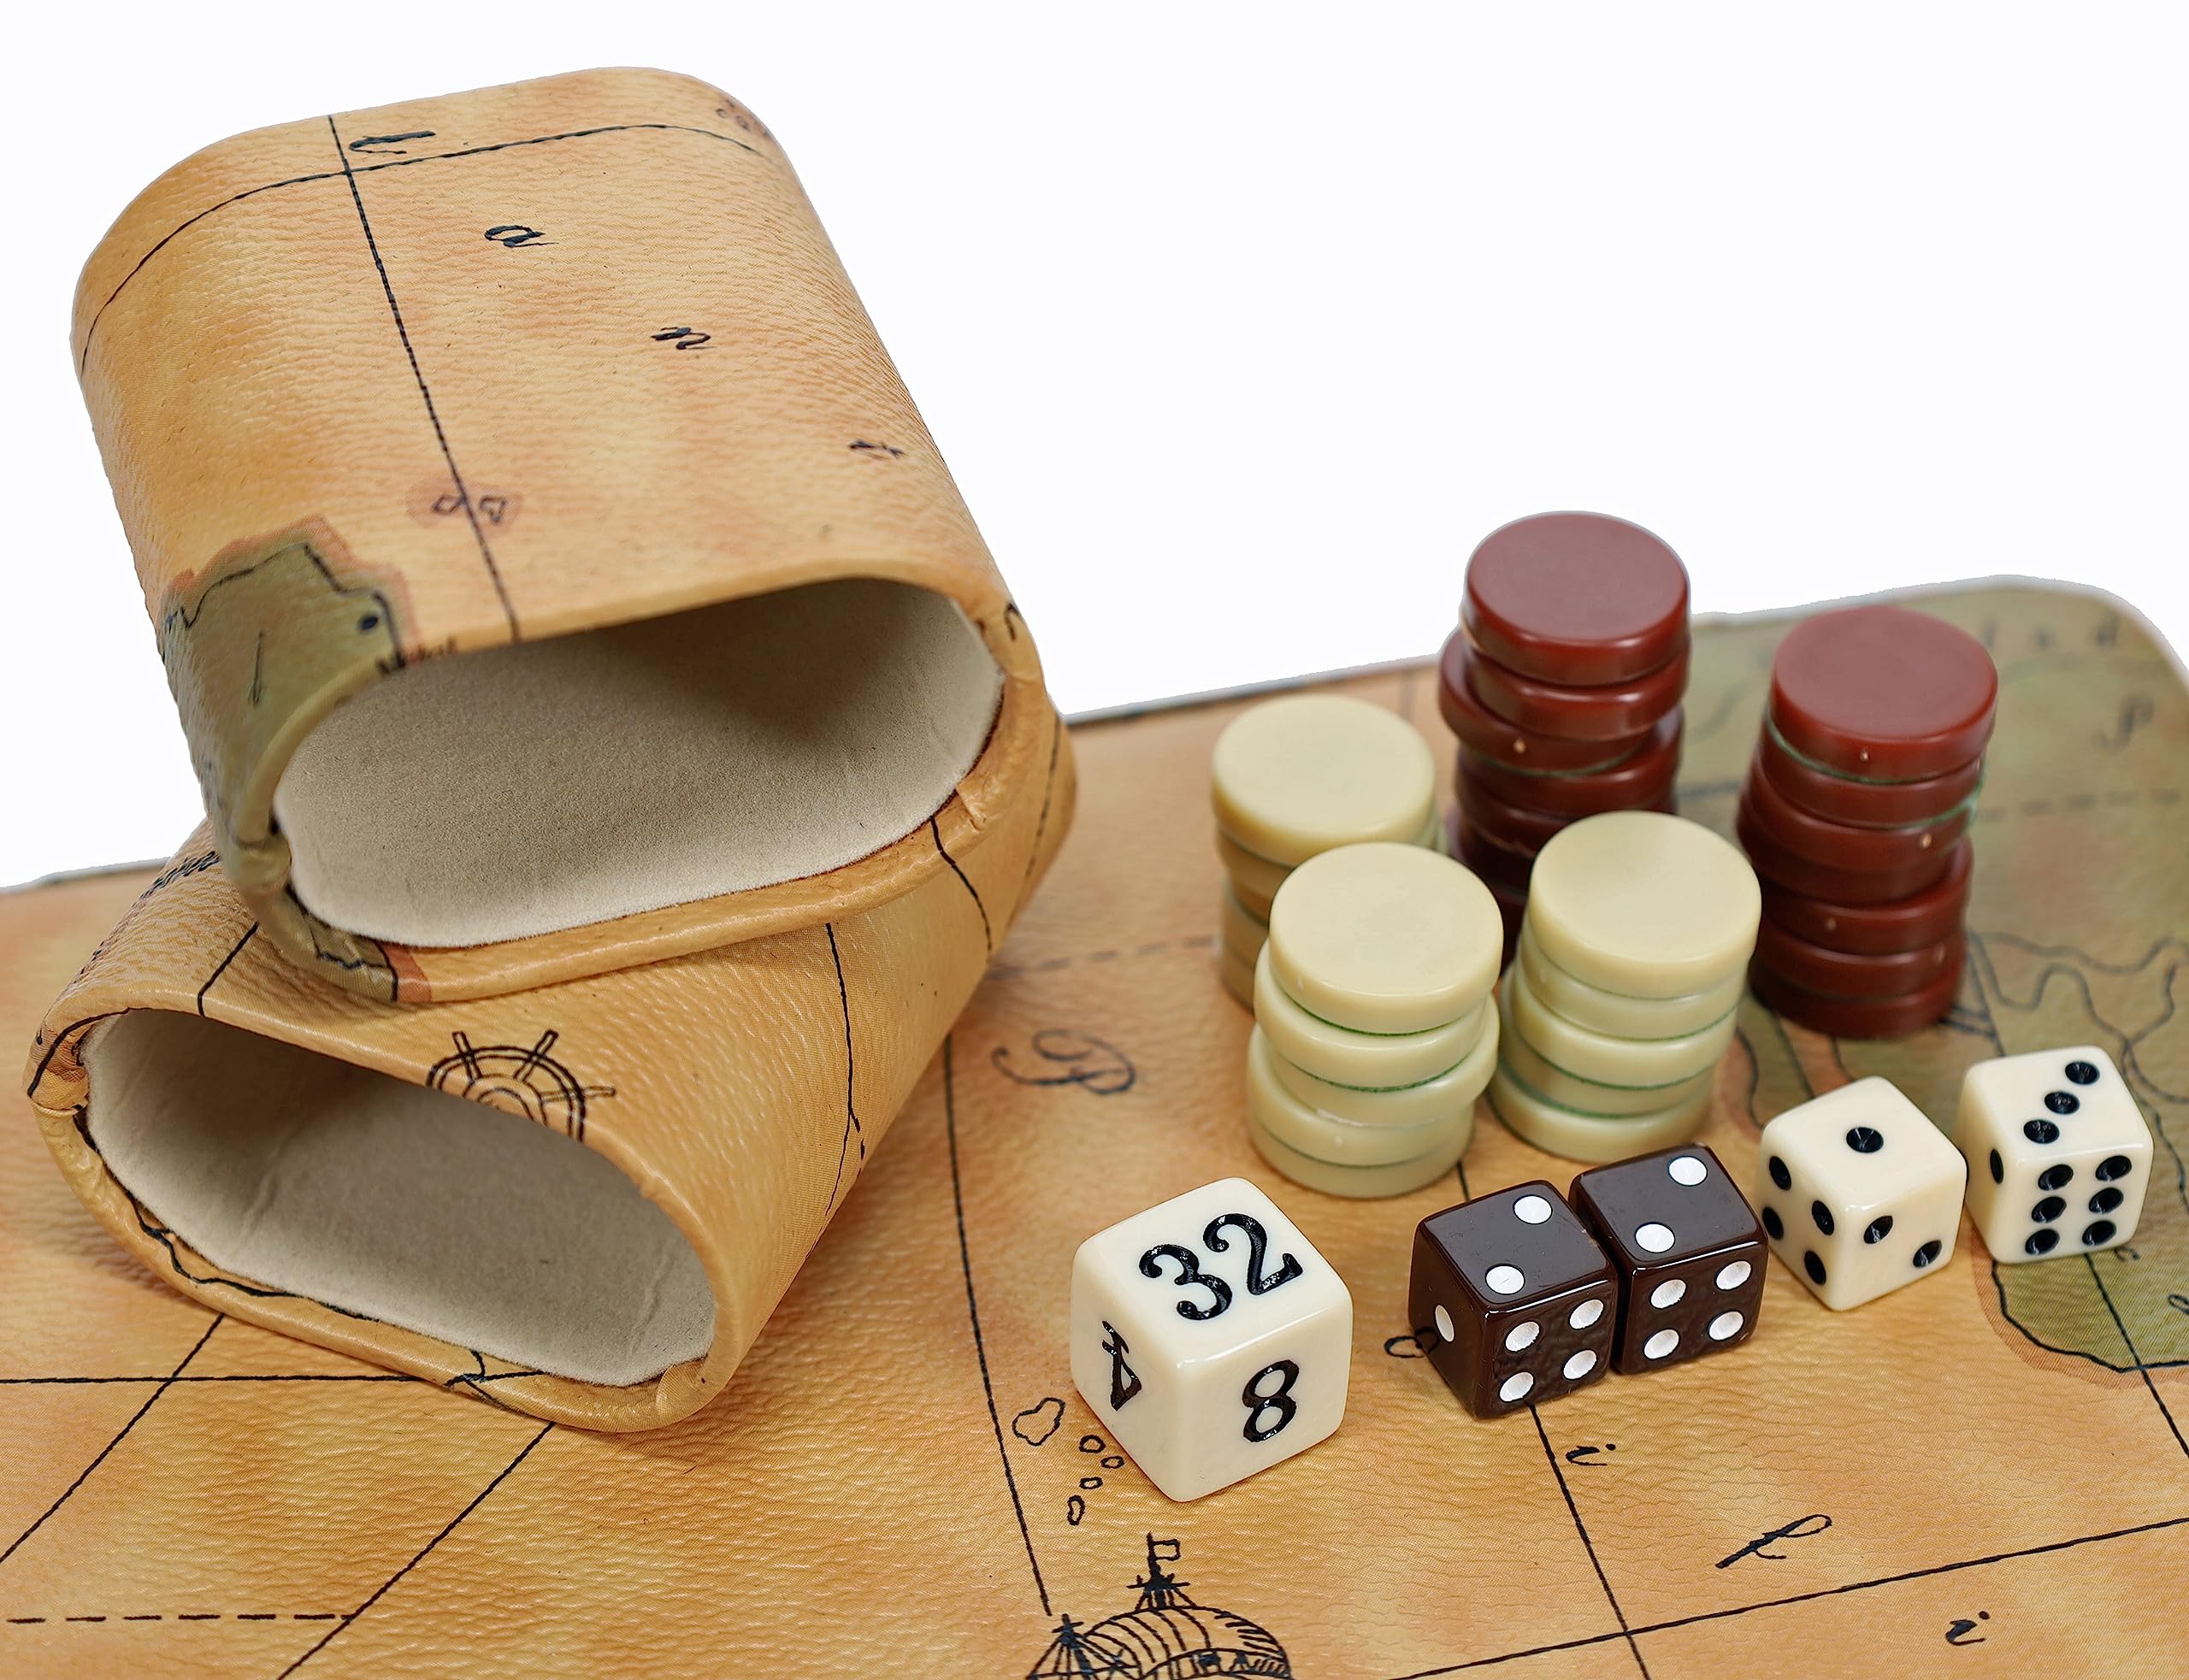 WE Games Backgammon Set, Board Games for Adults - Travel Games - Magnetic with Tan Map Style Leatherette Backgammon Board and Carrying Strap - Travel Backgammon Sets for Adults